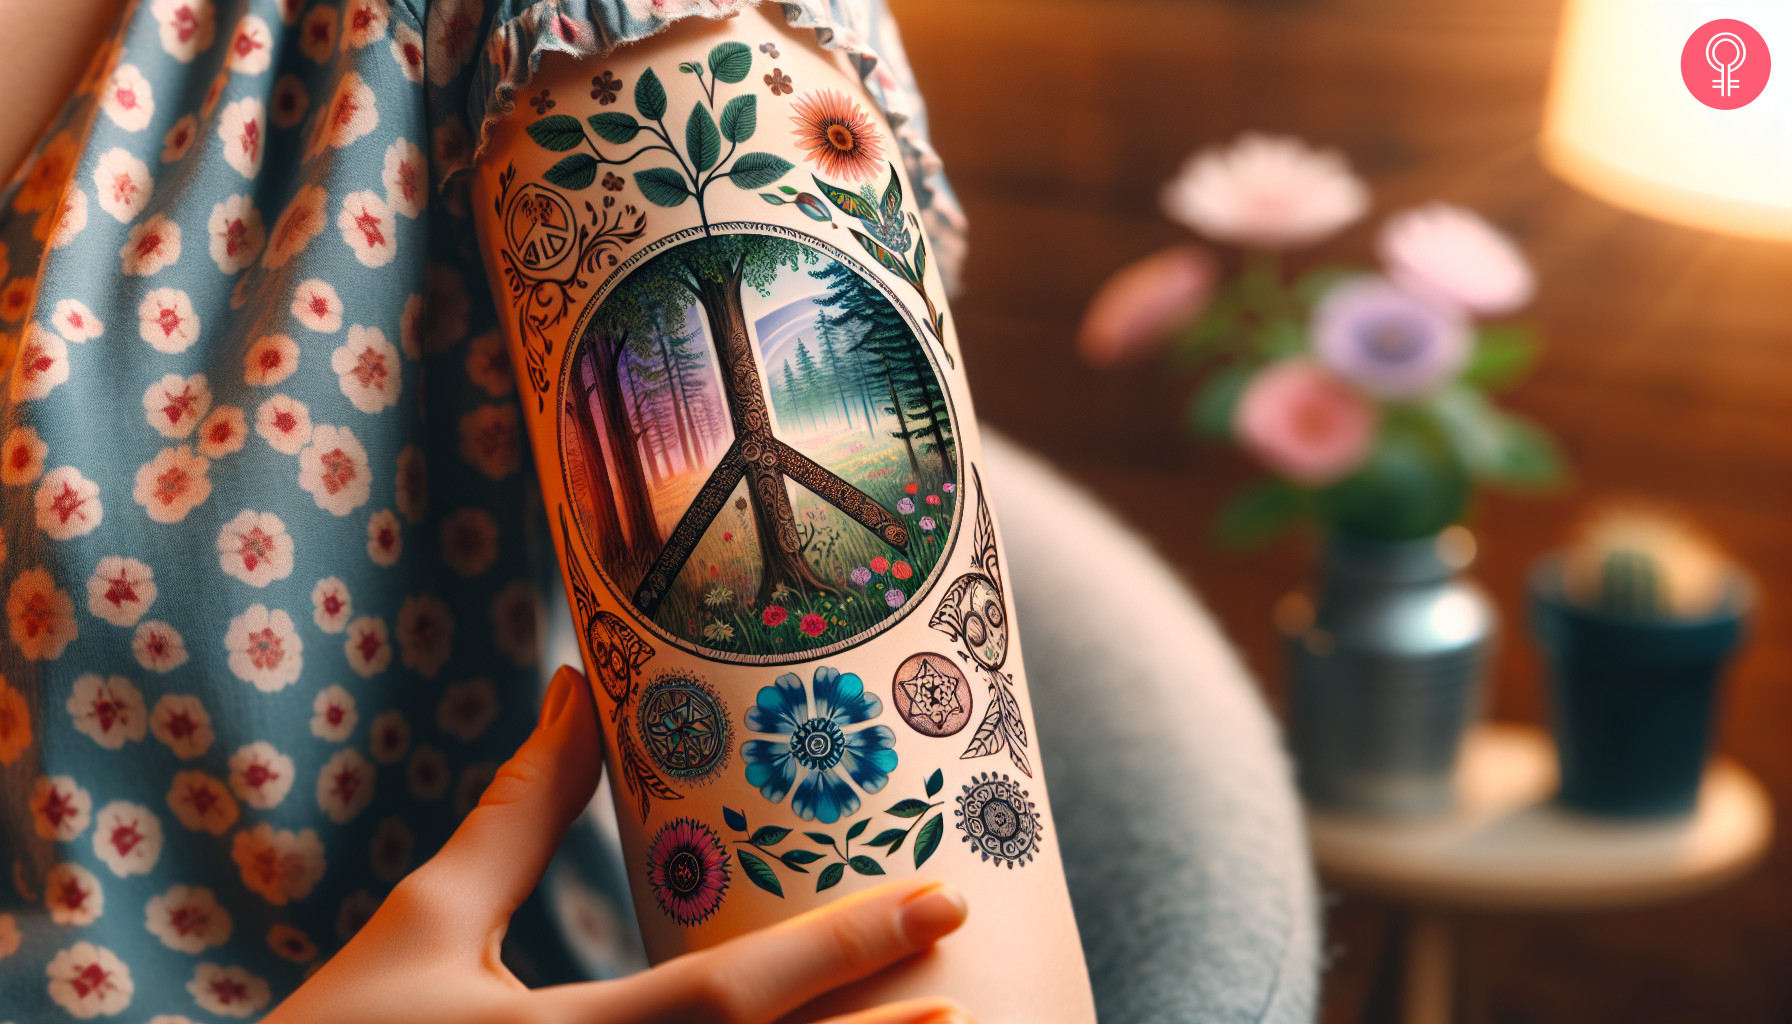 A hippie meaningful nature tattoo on the arm of a woman